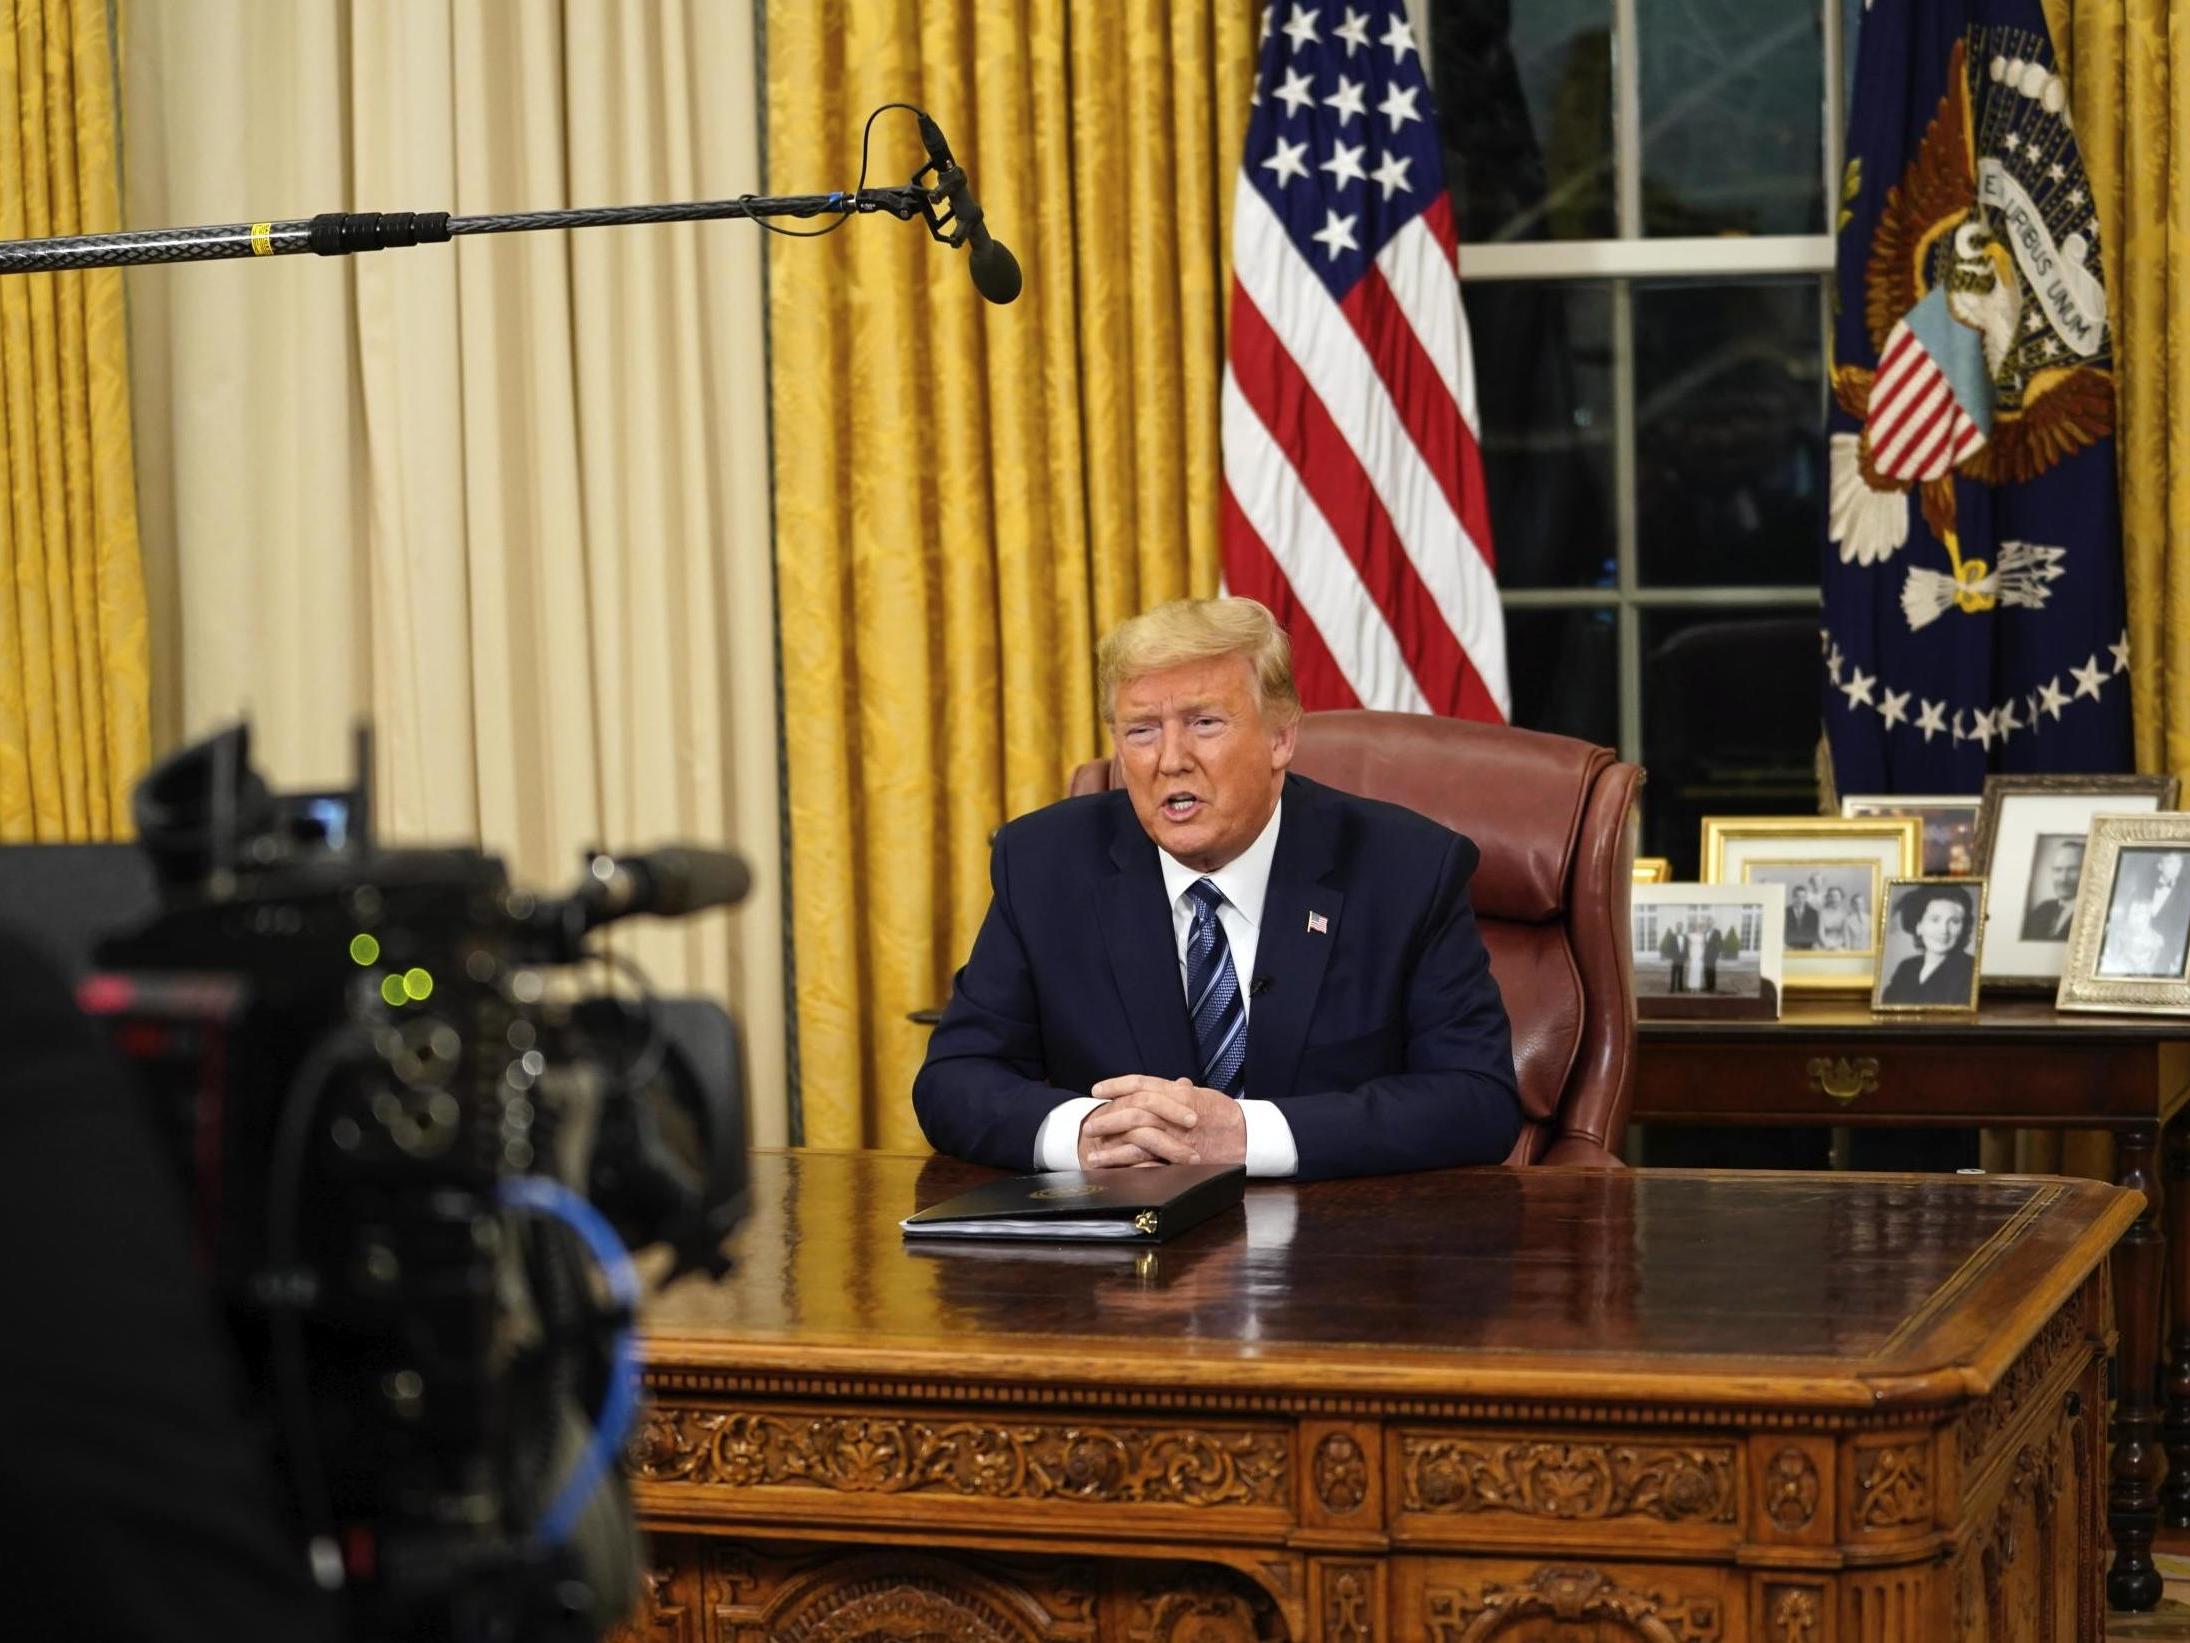 Donald Trump addresses the country from the Oval Office about the coronavirus outbreak